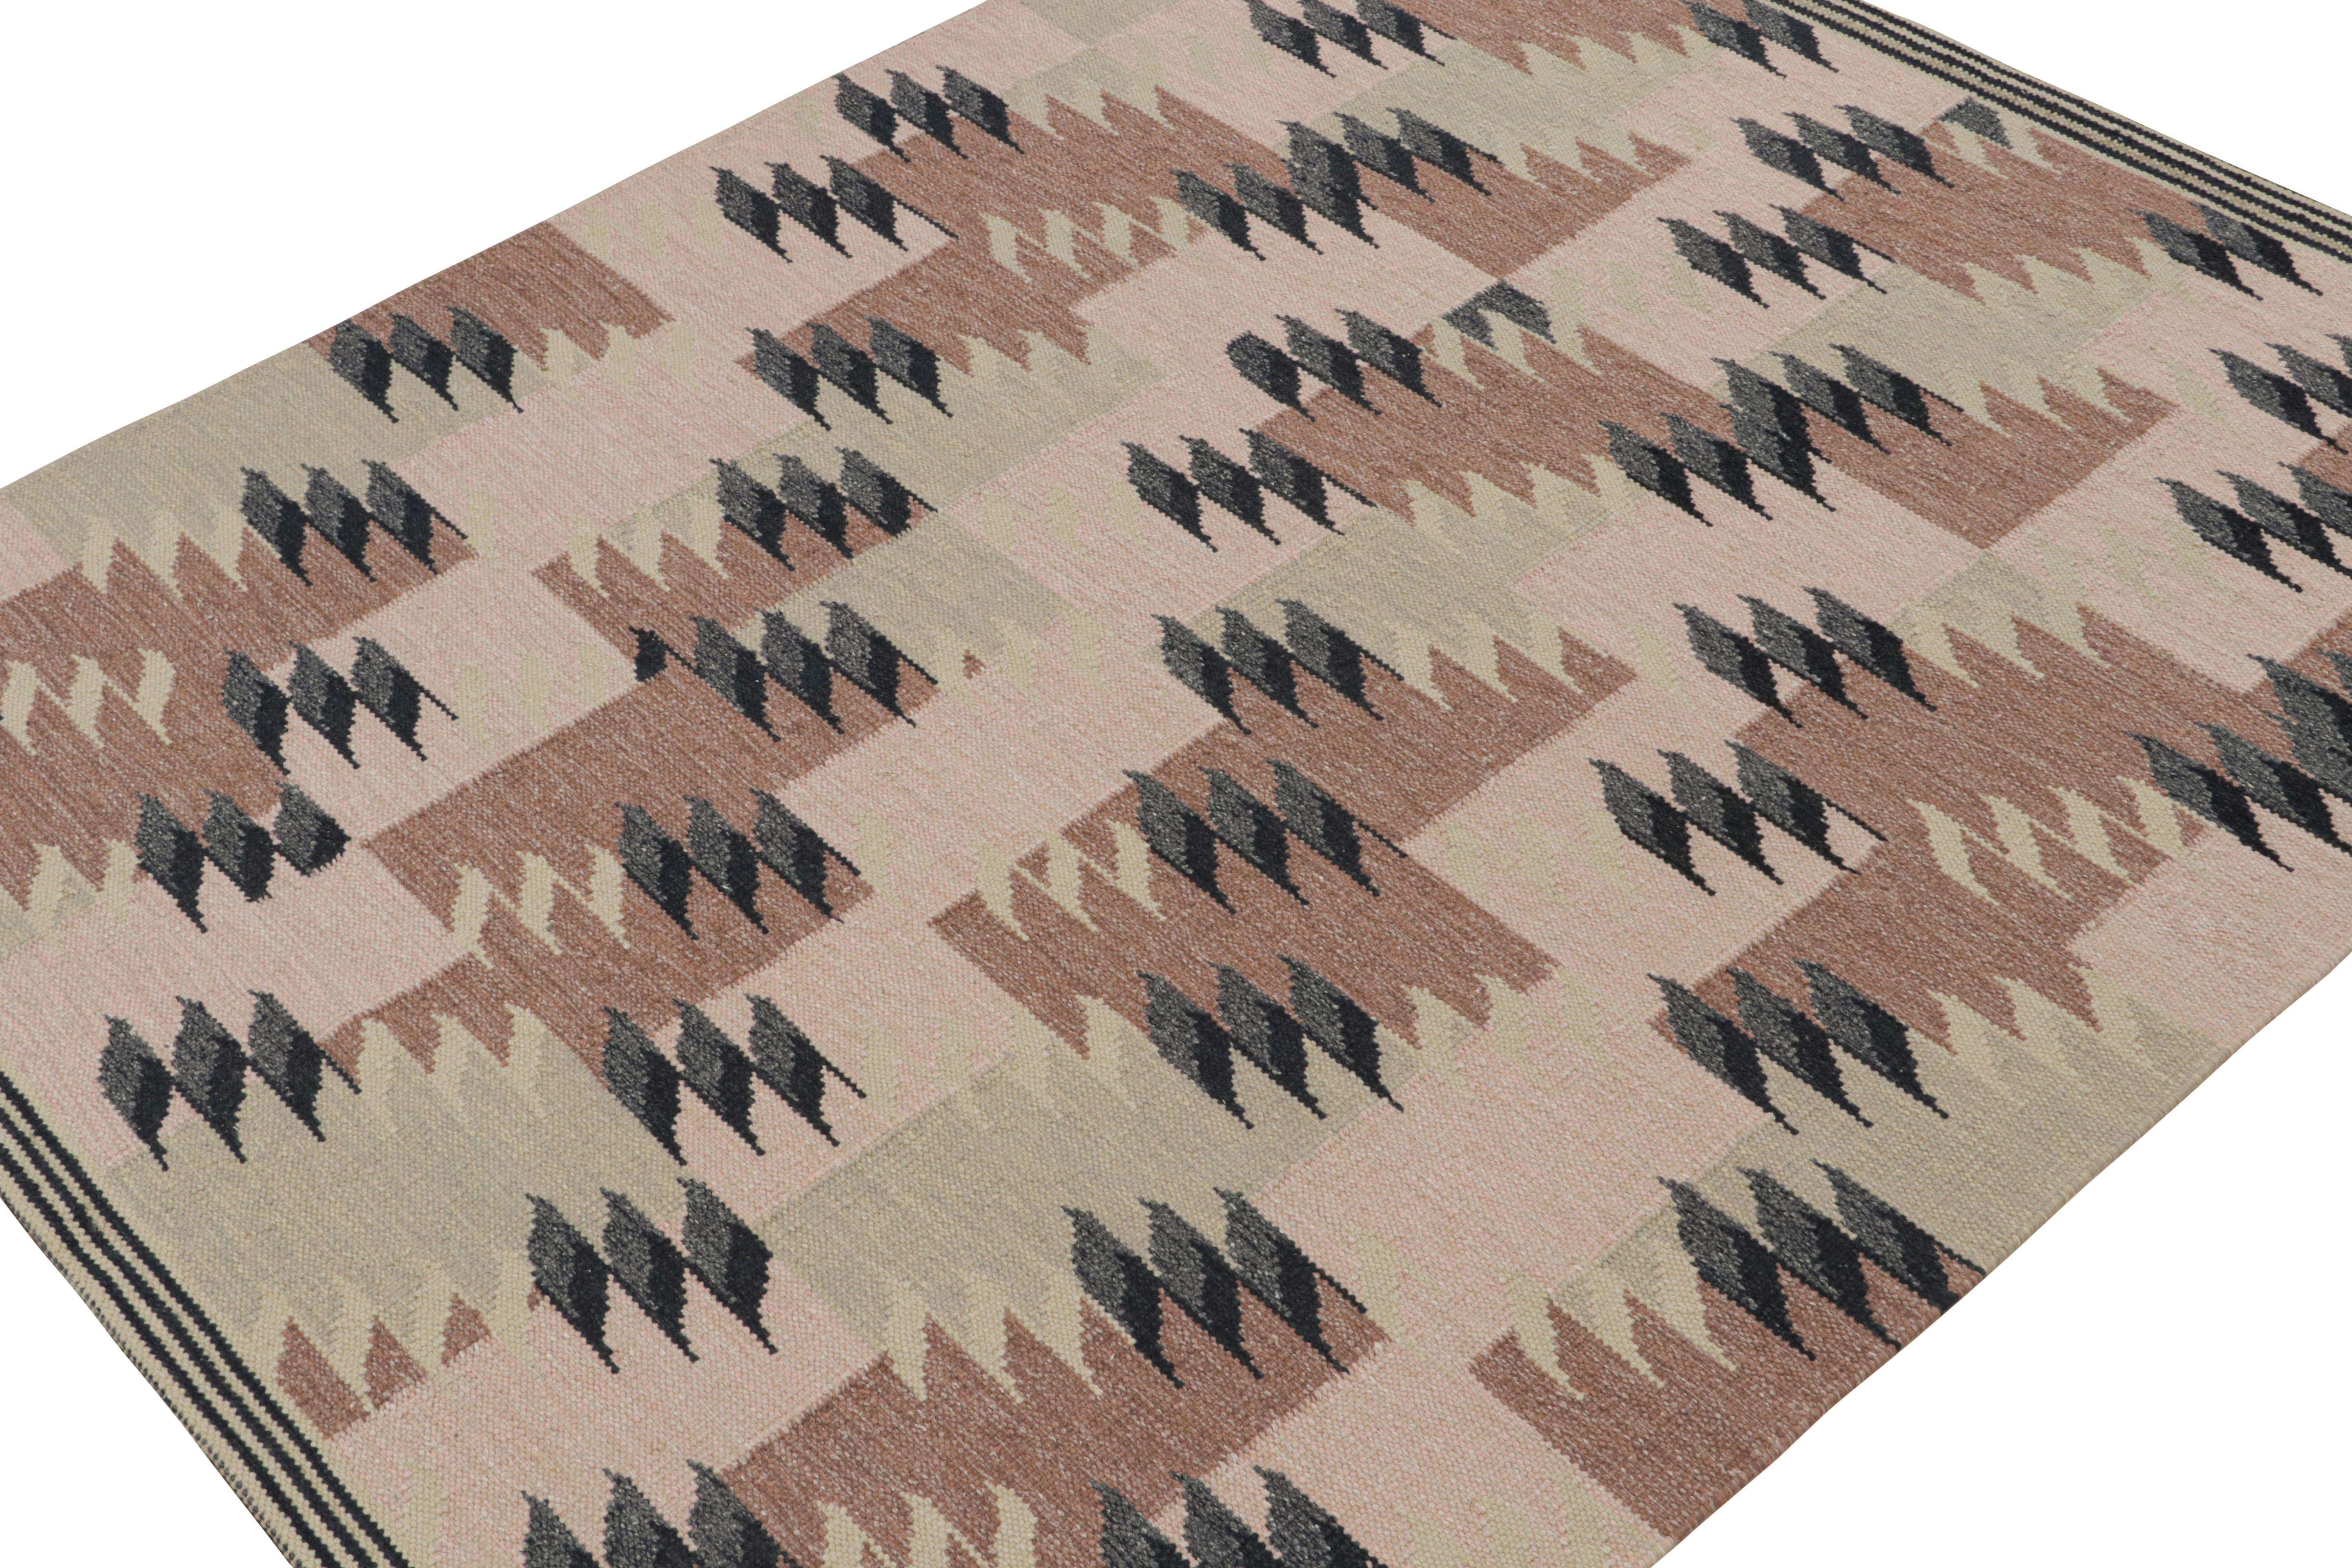 This 8×10 Kilim is a bold new addition to the Scandinavian Collection by Rug & Kilim. Handwoven in wool, cotton and natural yarns, its design reflects a contemporary take on mid-century Rollakans and Swedish Deco style.

On the Design:

This new